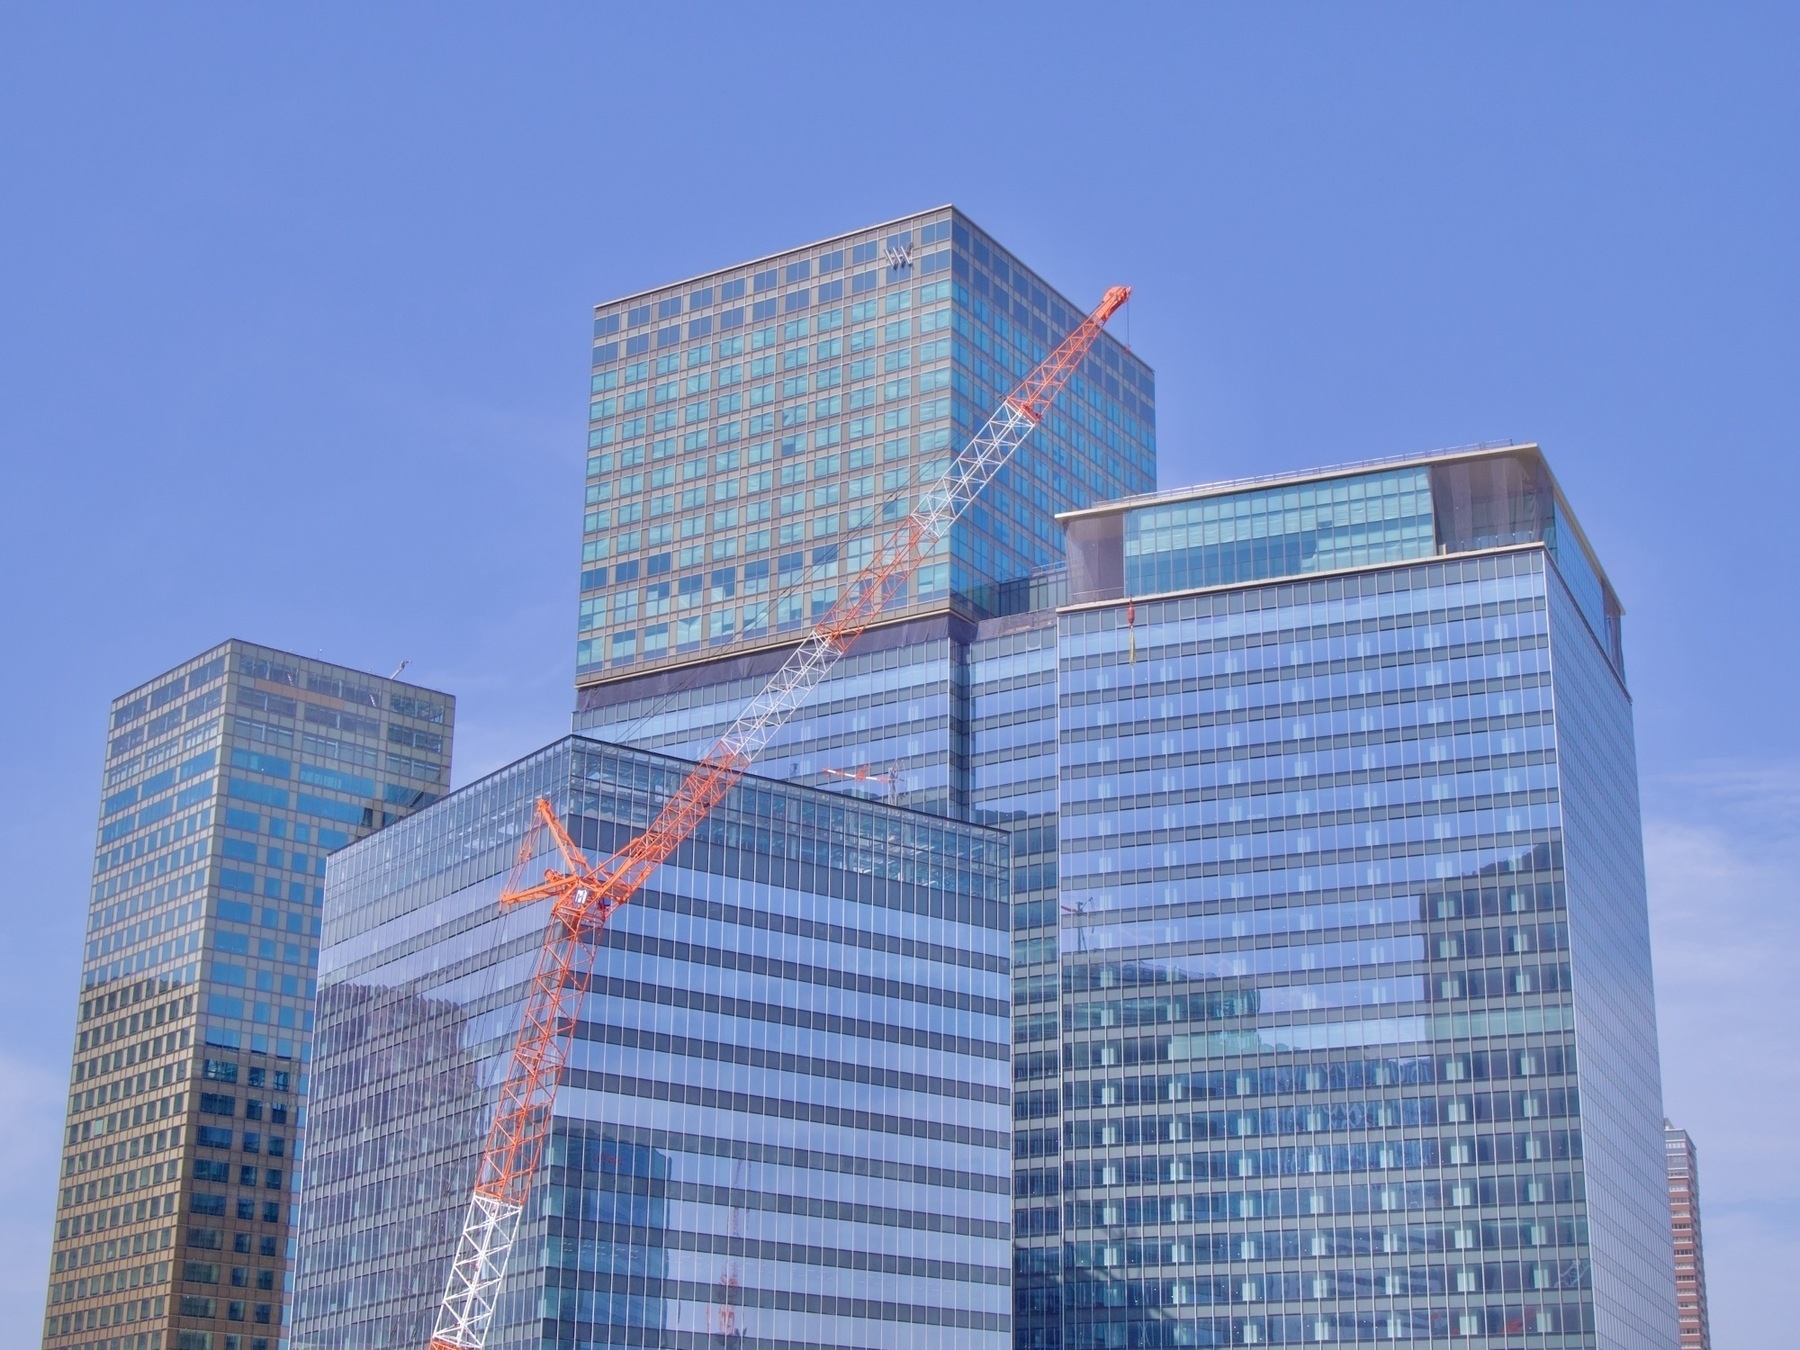 Some blue glass Umekita buildings with an orange-red building crane in front